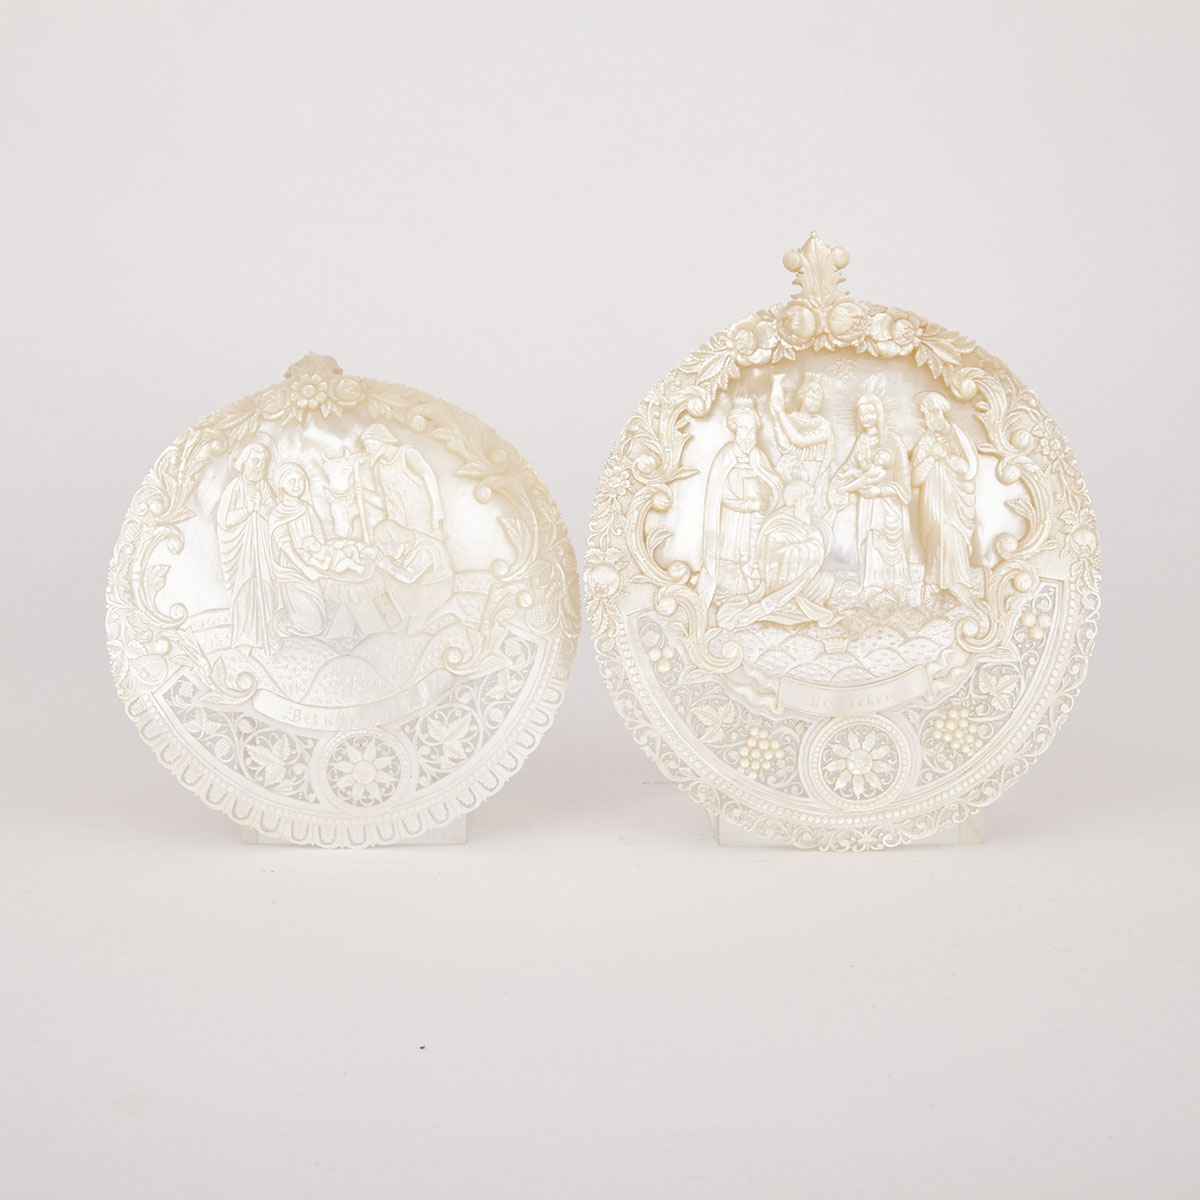 Two Palestinian Mother of  Pearl Souvenirs of Bethlehem, c.1900